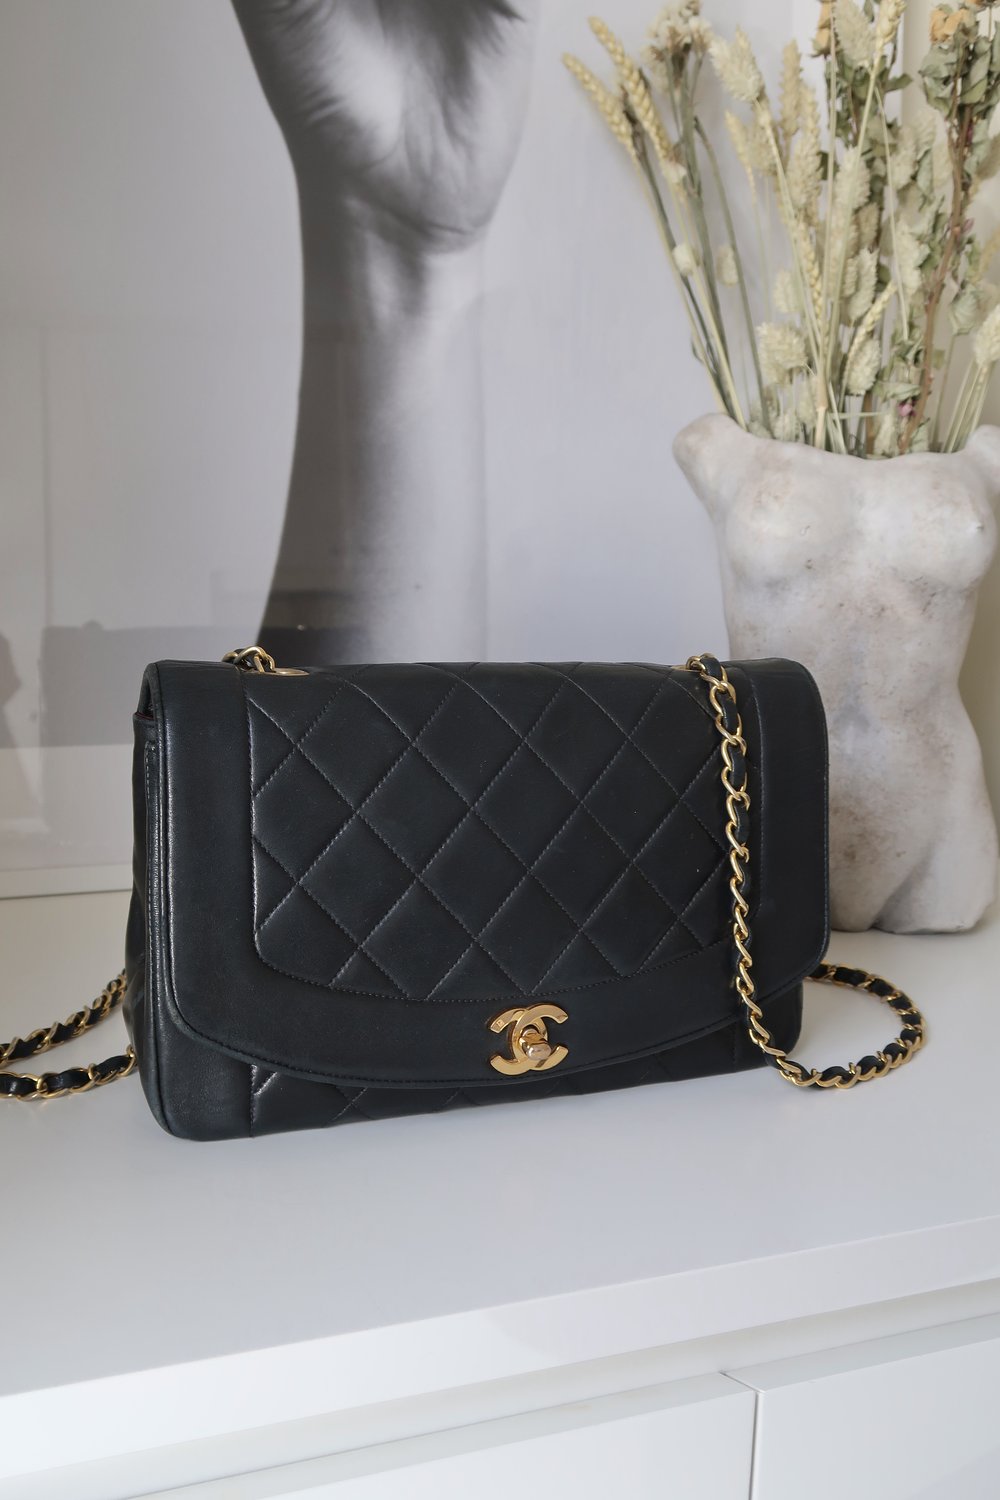 Vintage Chanel Black Quilted Diana Flap Bag - 2 series (1991 - 1994) —  Blaise Ruby Loves